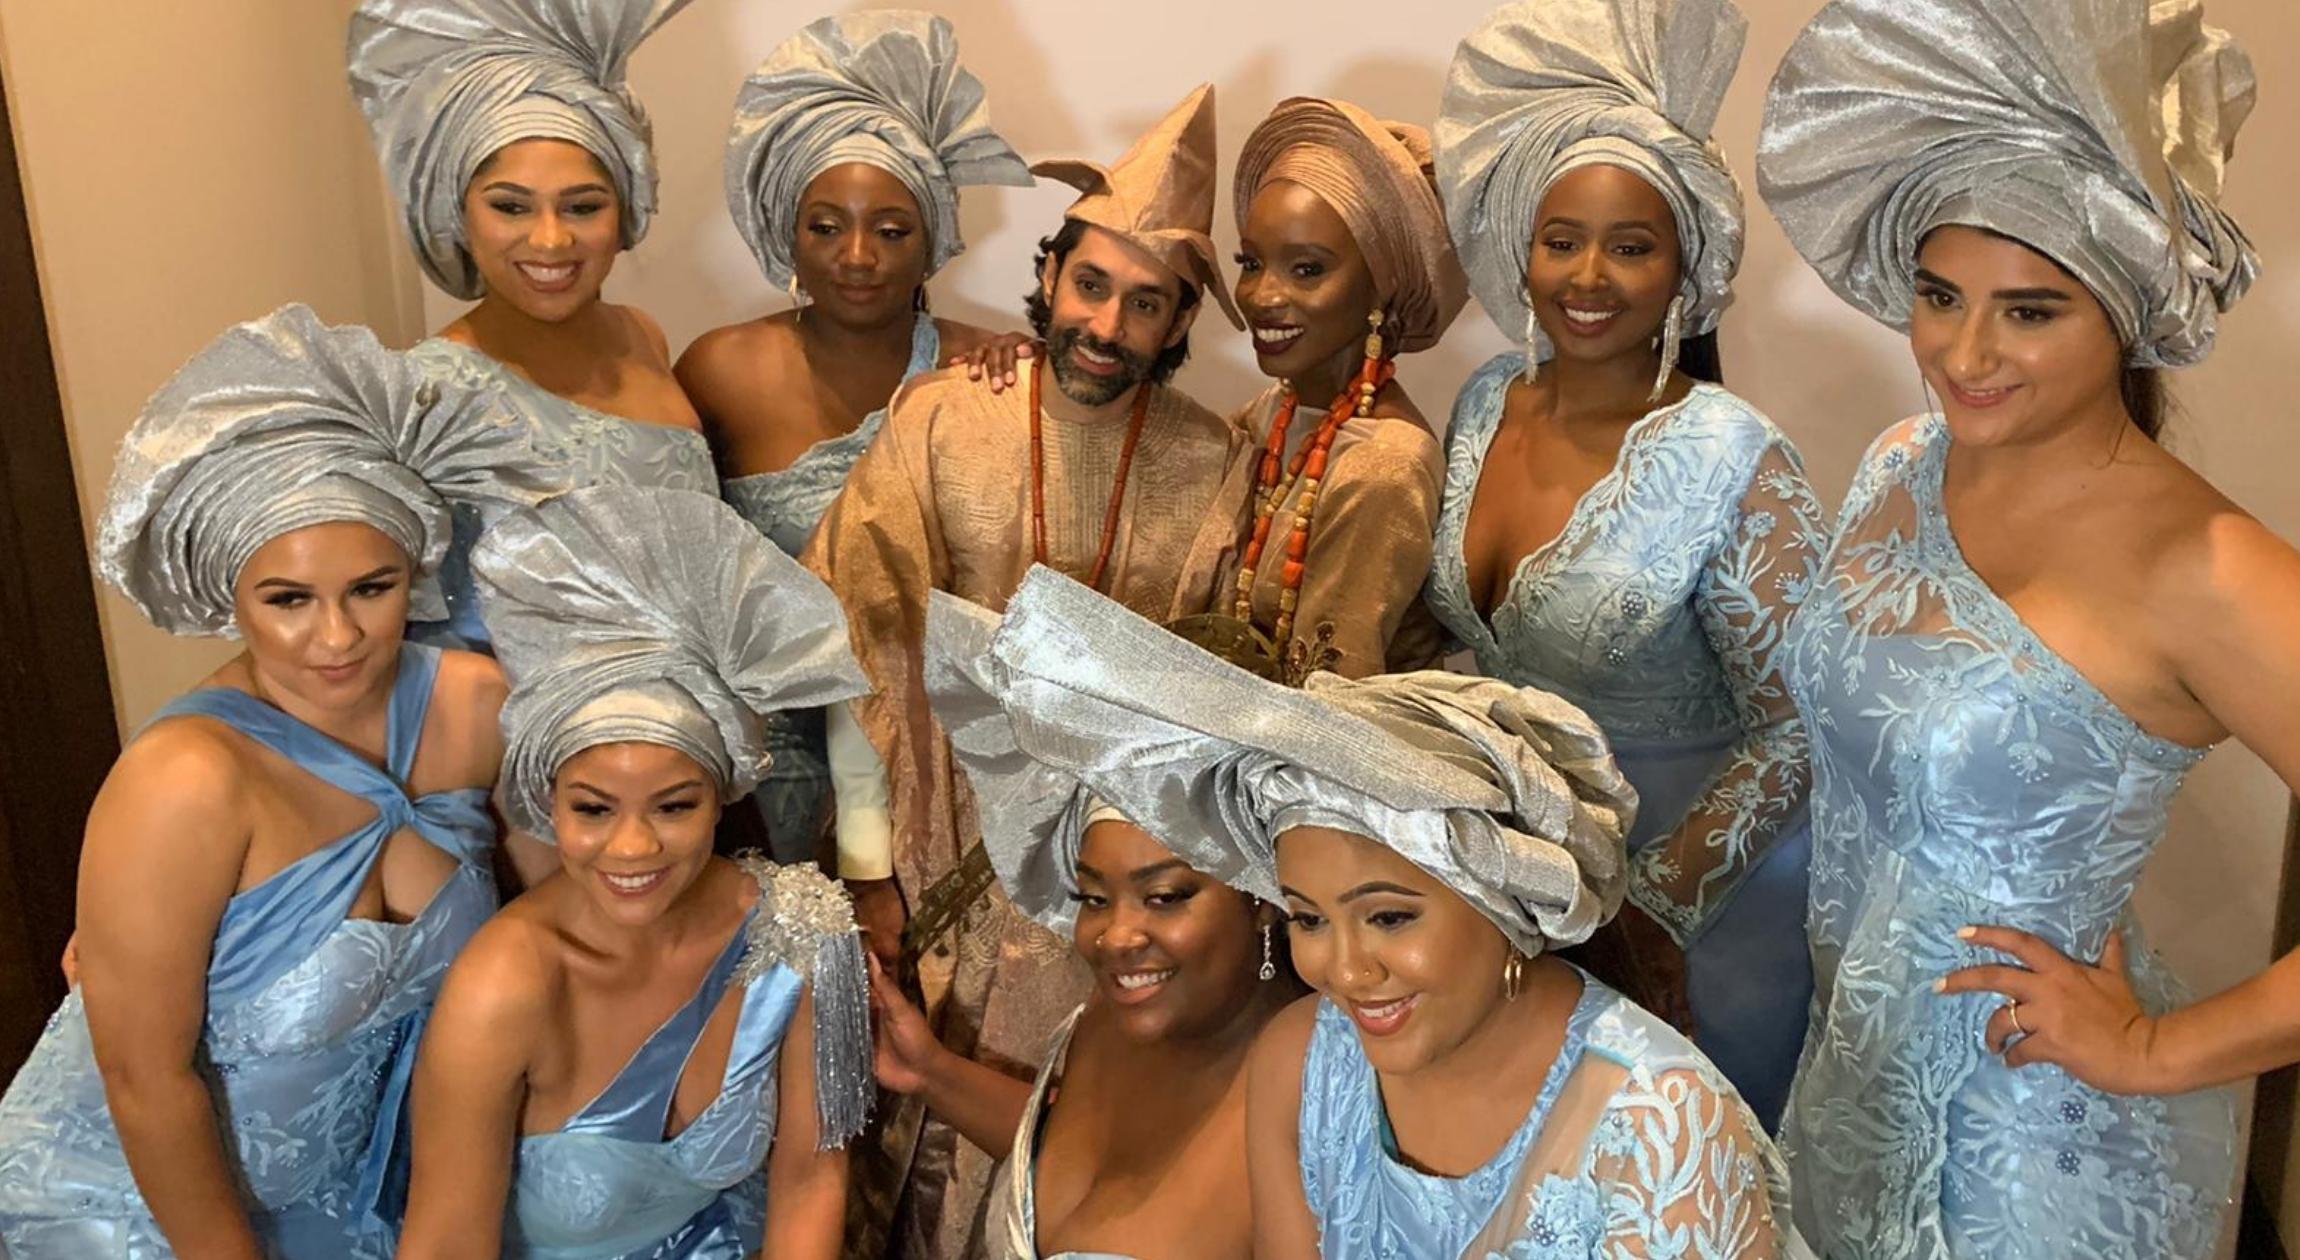 A Hindu husband and Nigerian wife with their bridesmaids in Nigerian attire